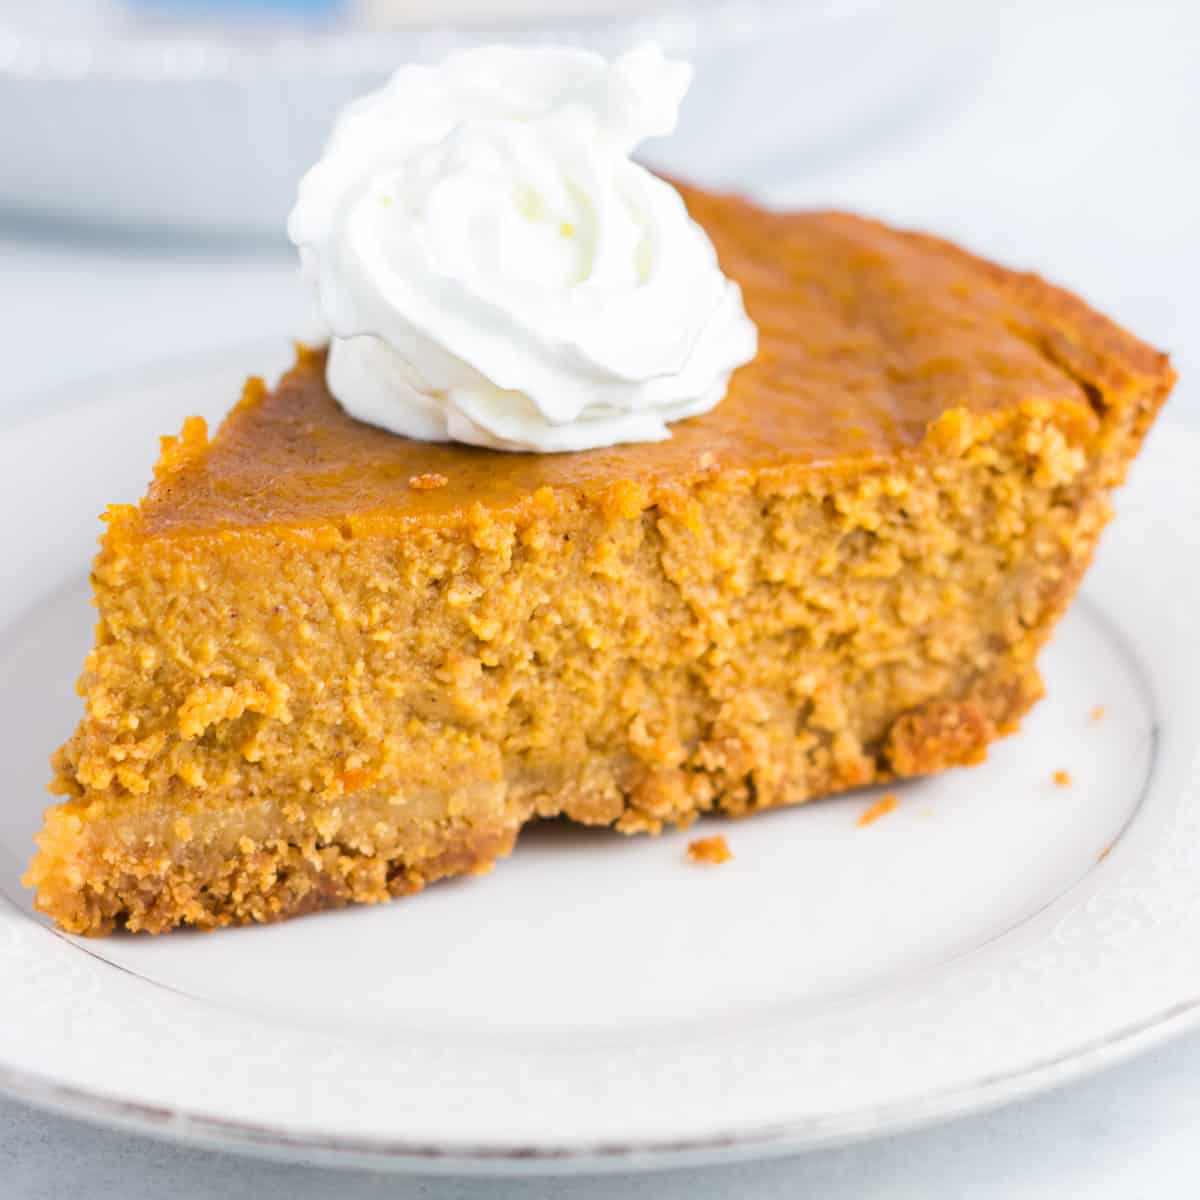 a slice of pumpkin pie on a plate topped with whipped cream